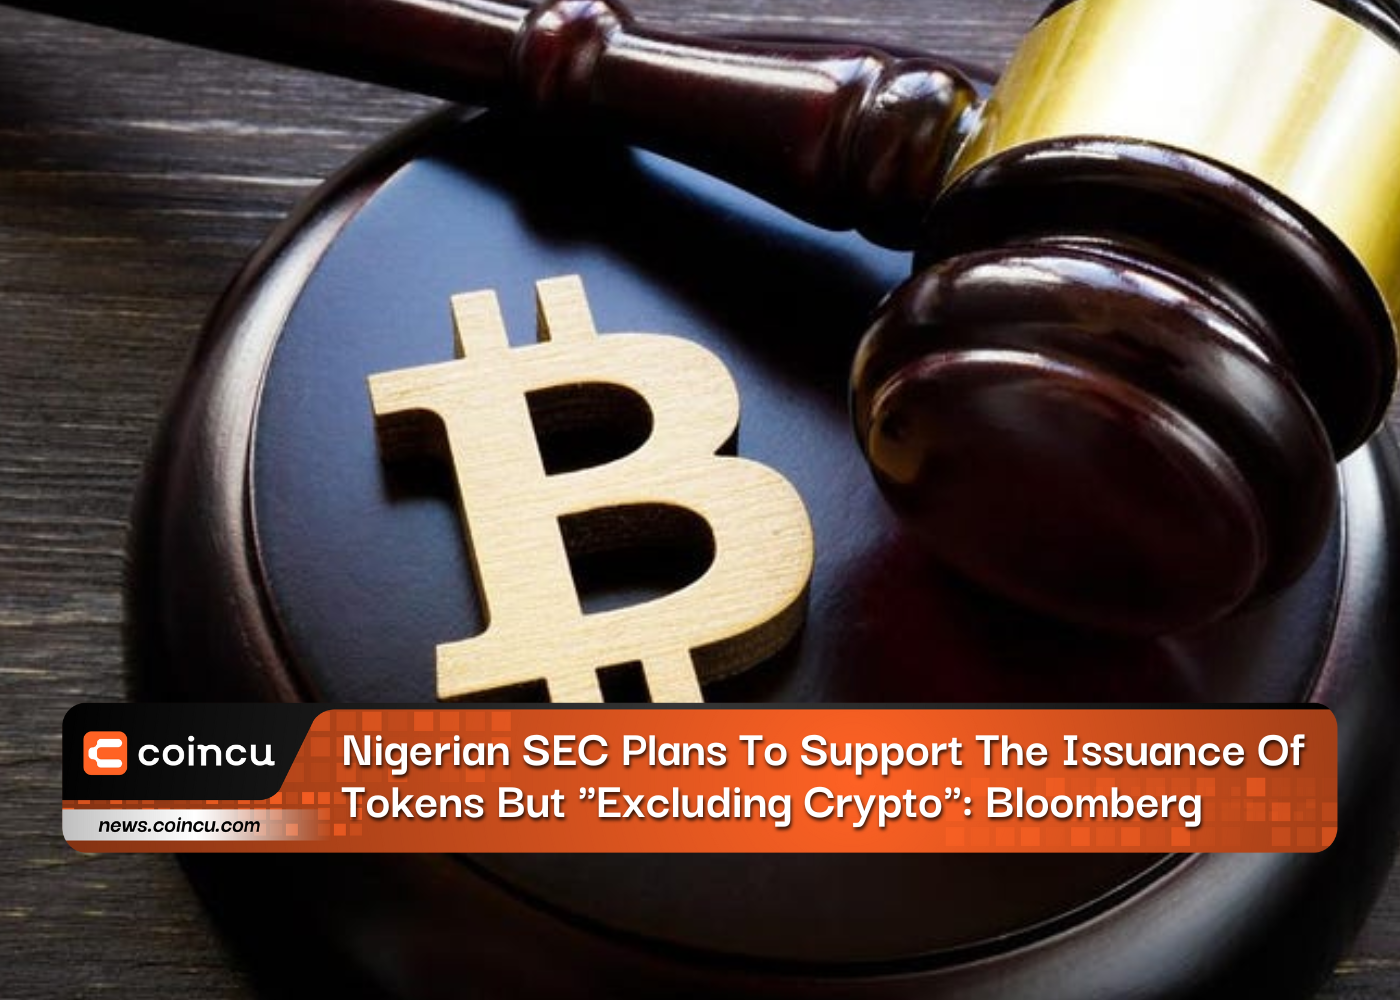 Nigerian SEC Plans To Support The Issuance Of Tokens But "Excluding Crypto": Bloomberg